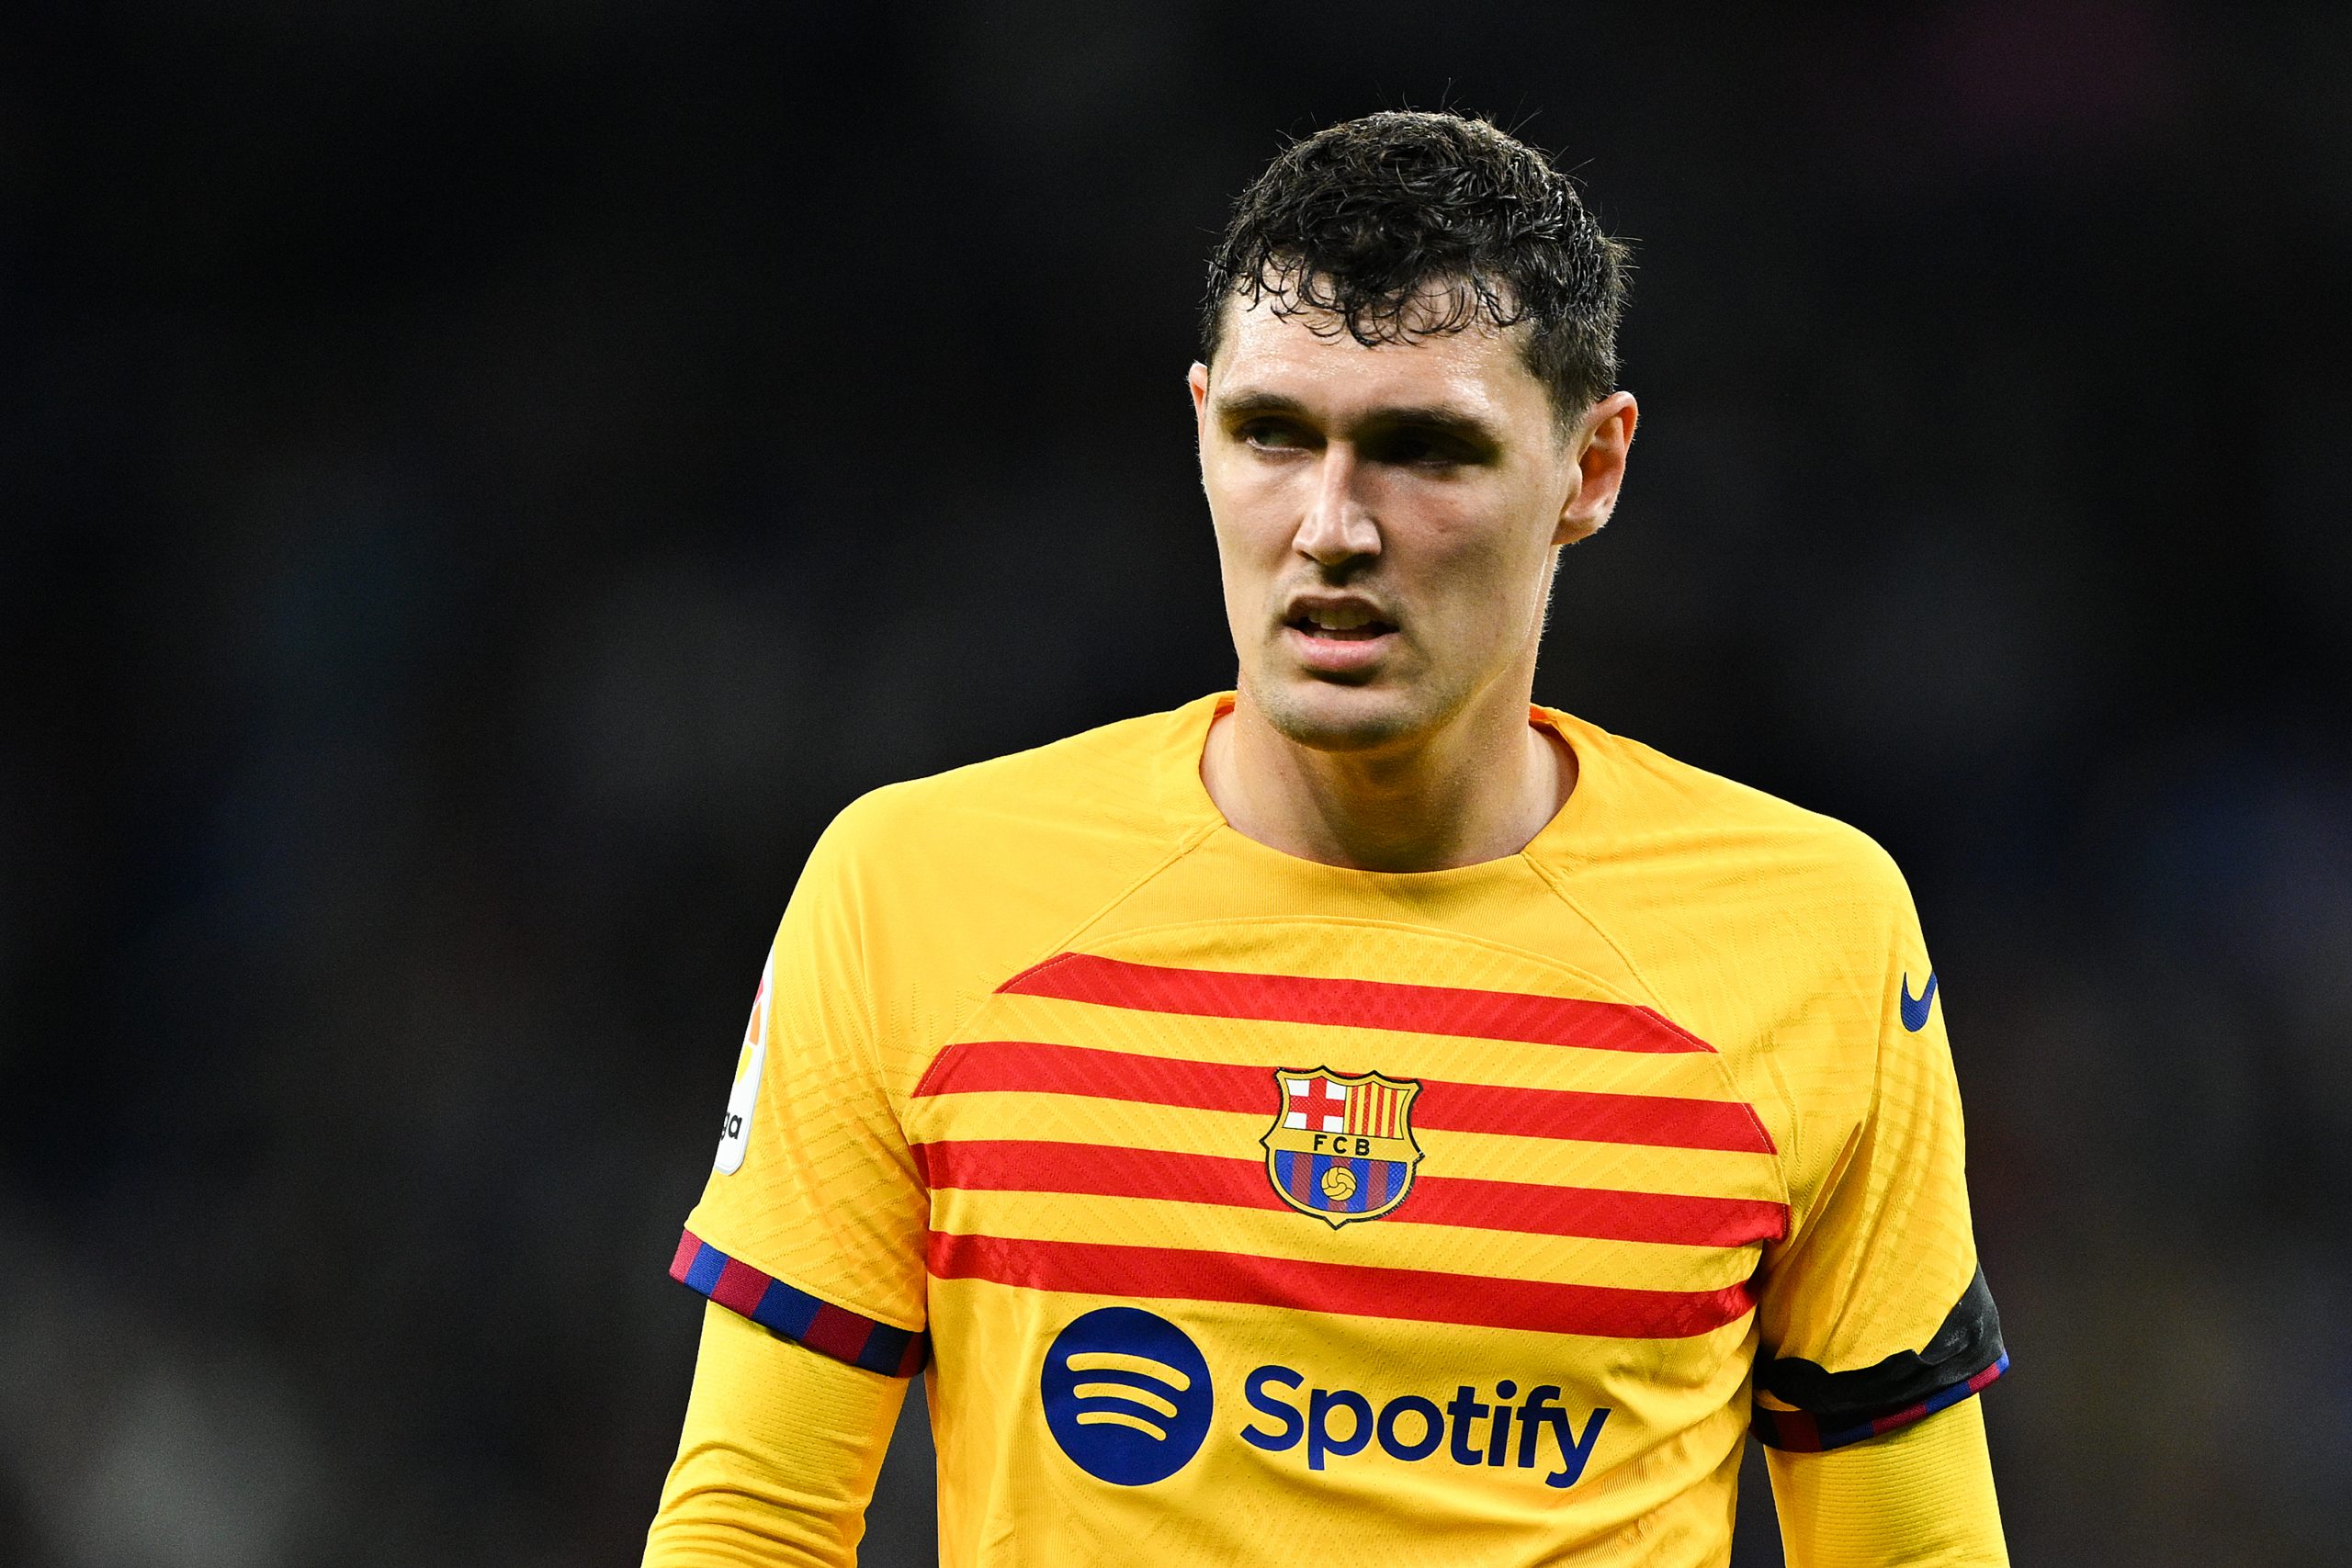 BARCELONA, SPAIN - MAY 14: Andreas Christensen of FC Barcelona looks on during the LaLiga Santander match between RCD Espanyol and FC Barcelona at RCDE Stadium on May 14, 2023 in Barcelona, Spain. (Photo by David Ramos/Getty Images)